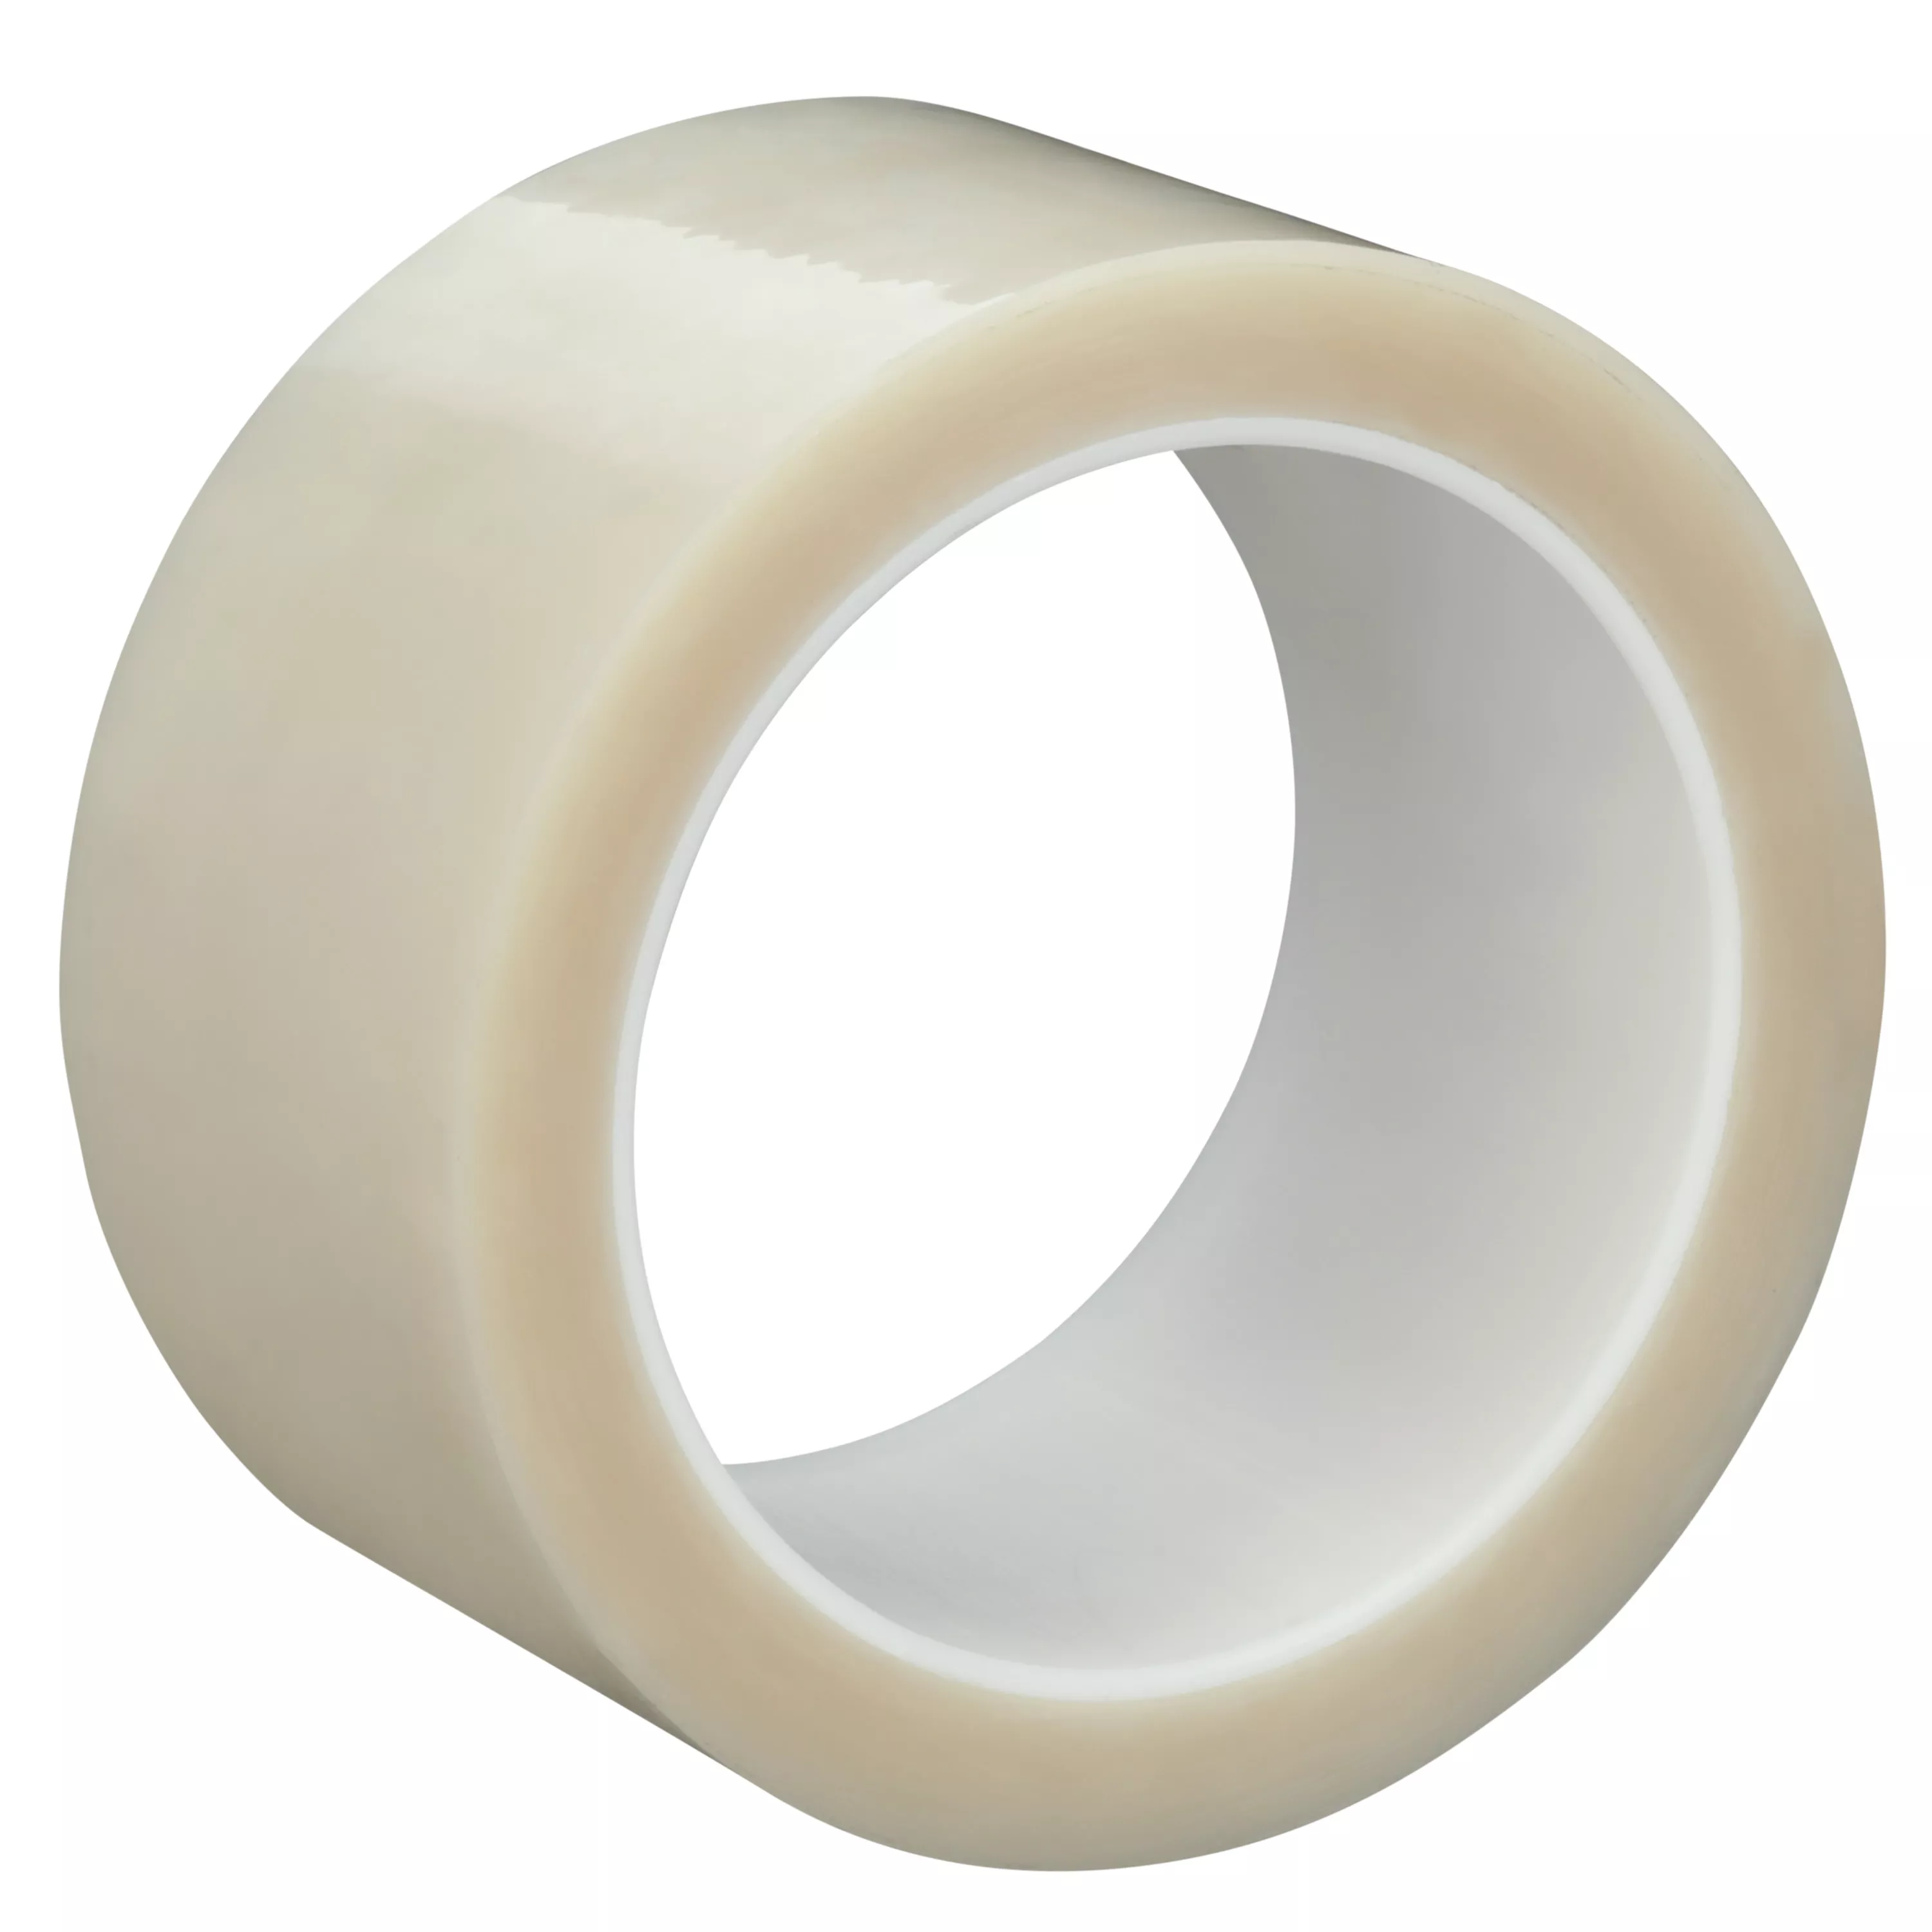 3M™ Polyester Film Tape 850, Transparent, 2 in x 72 yd, 1.9 mil, 24
Roll/Case